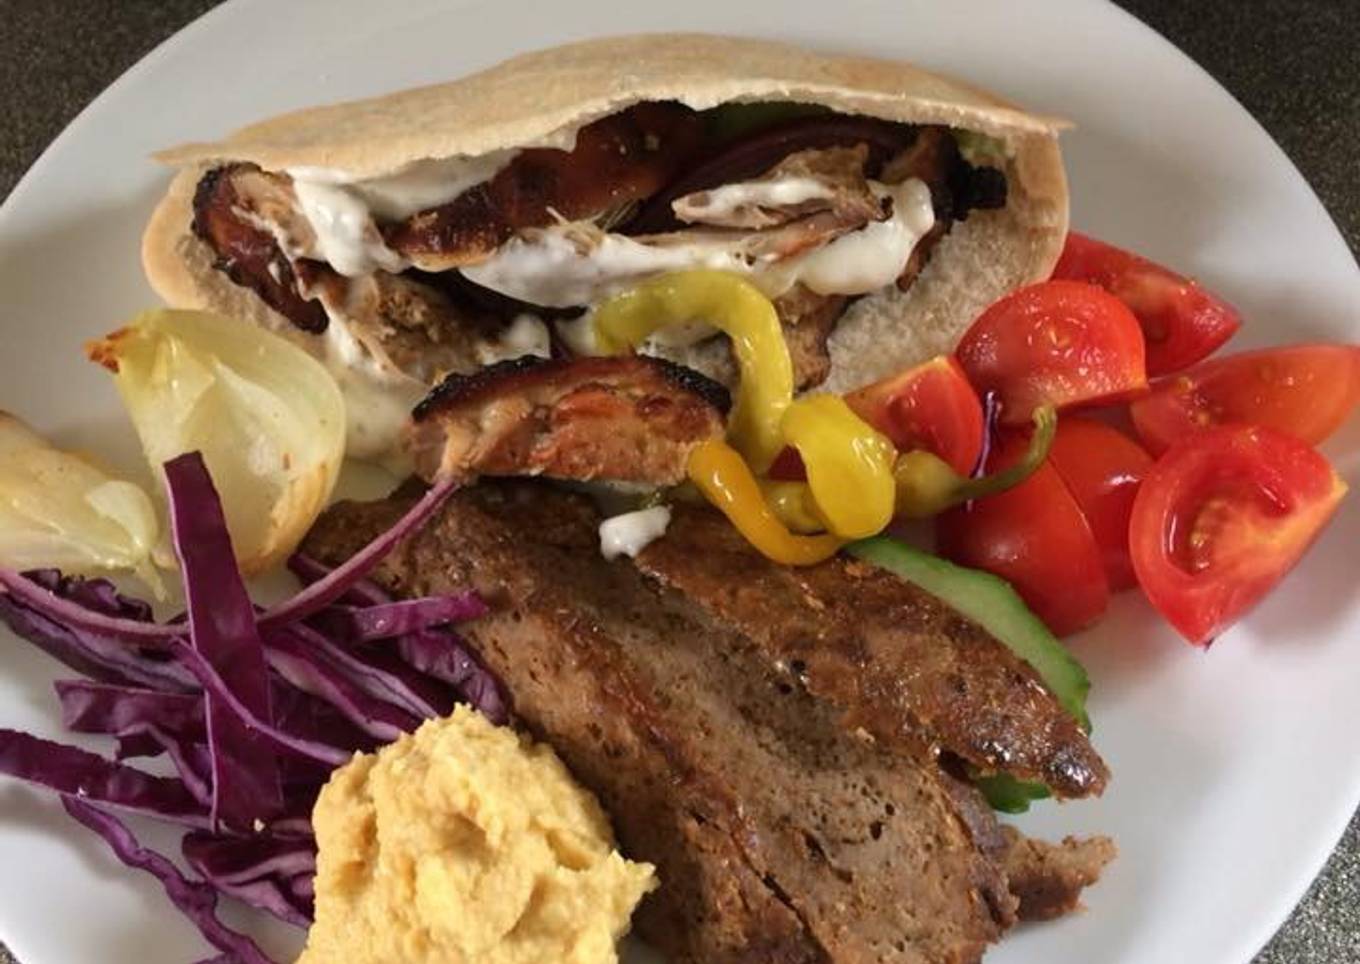 Homemade donner and chicken kebab with all the trimmings 😋